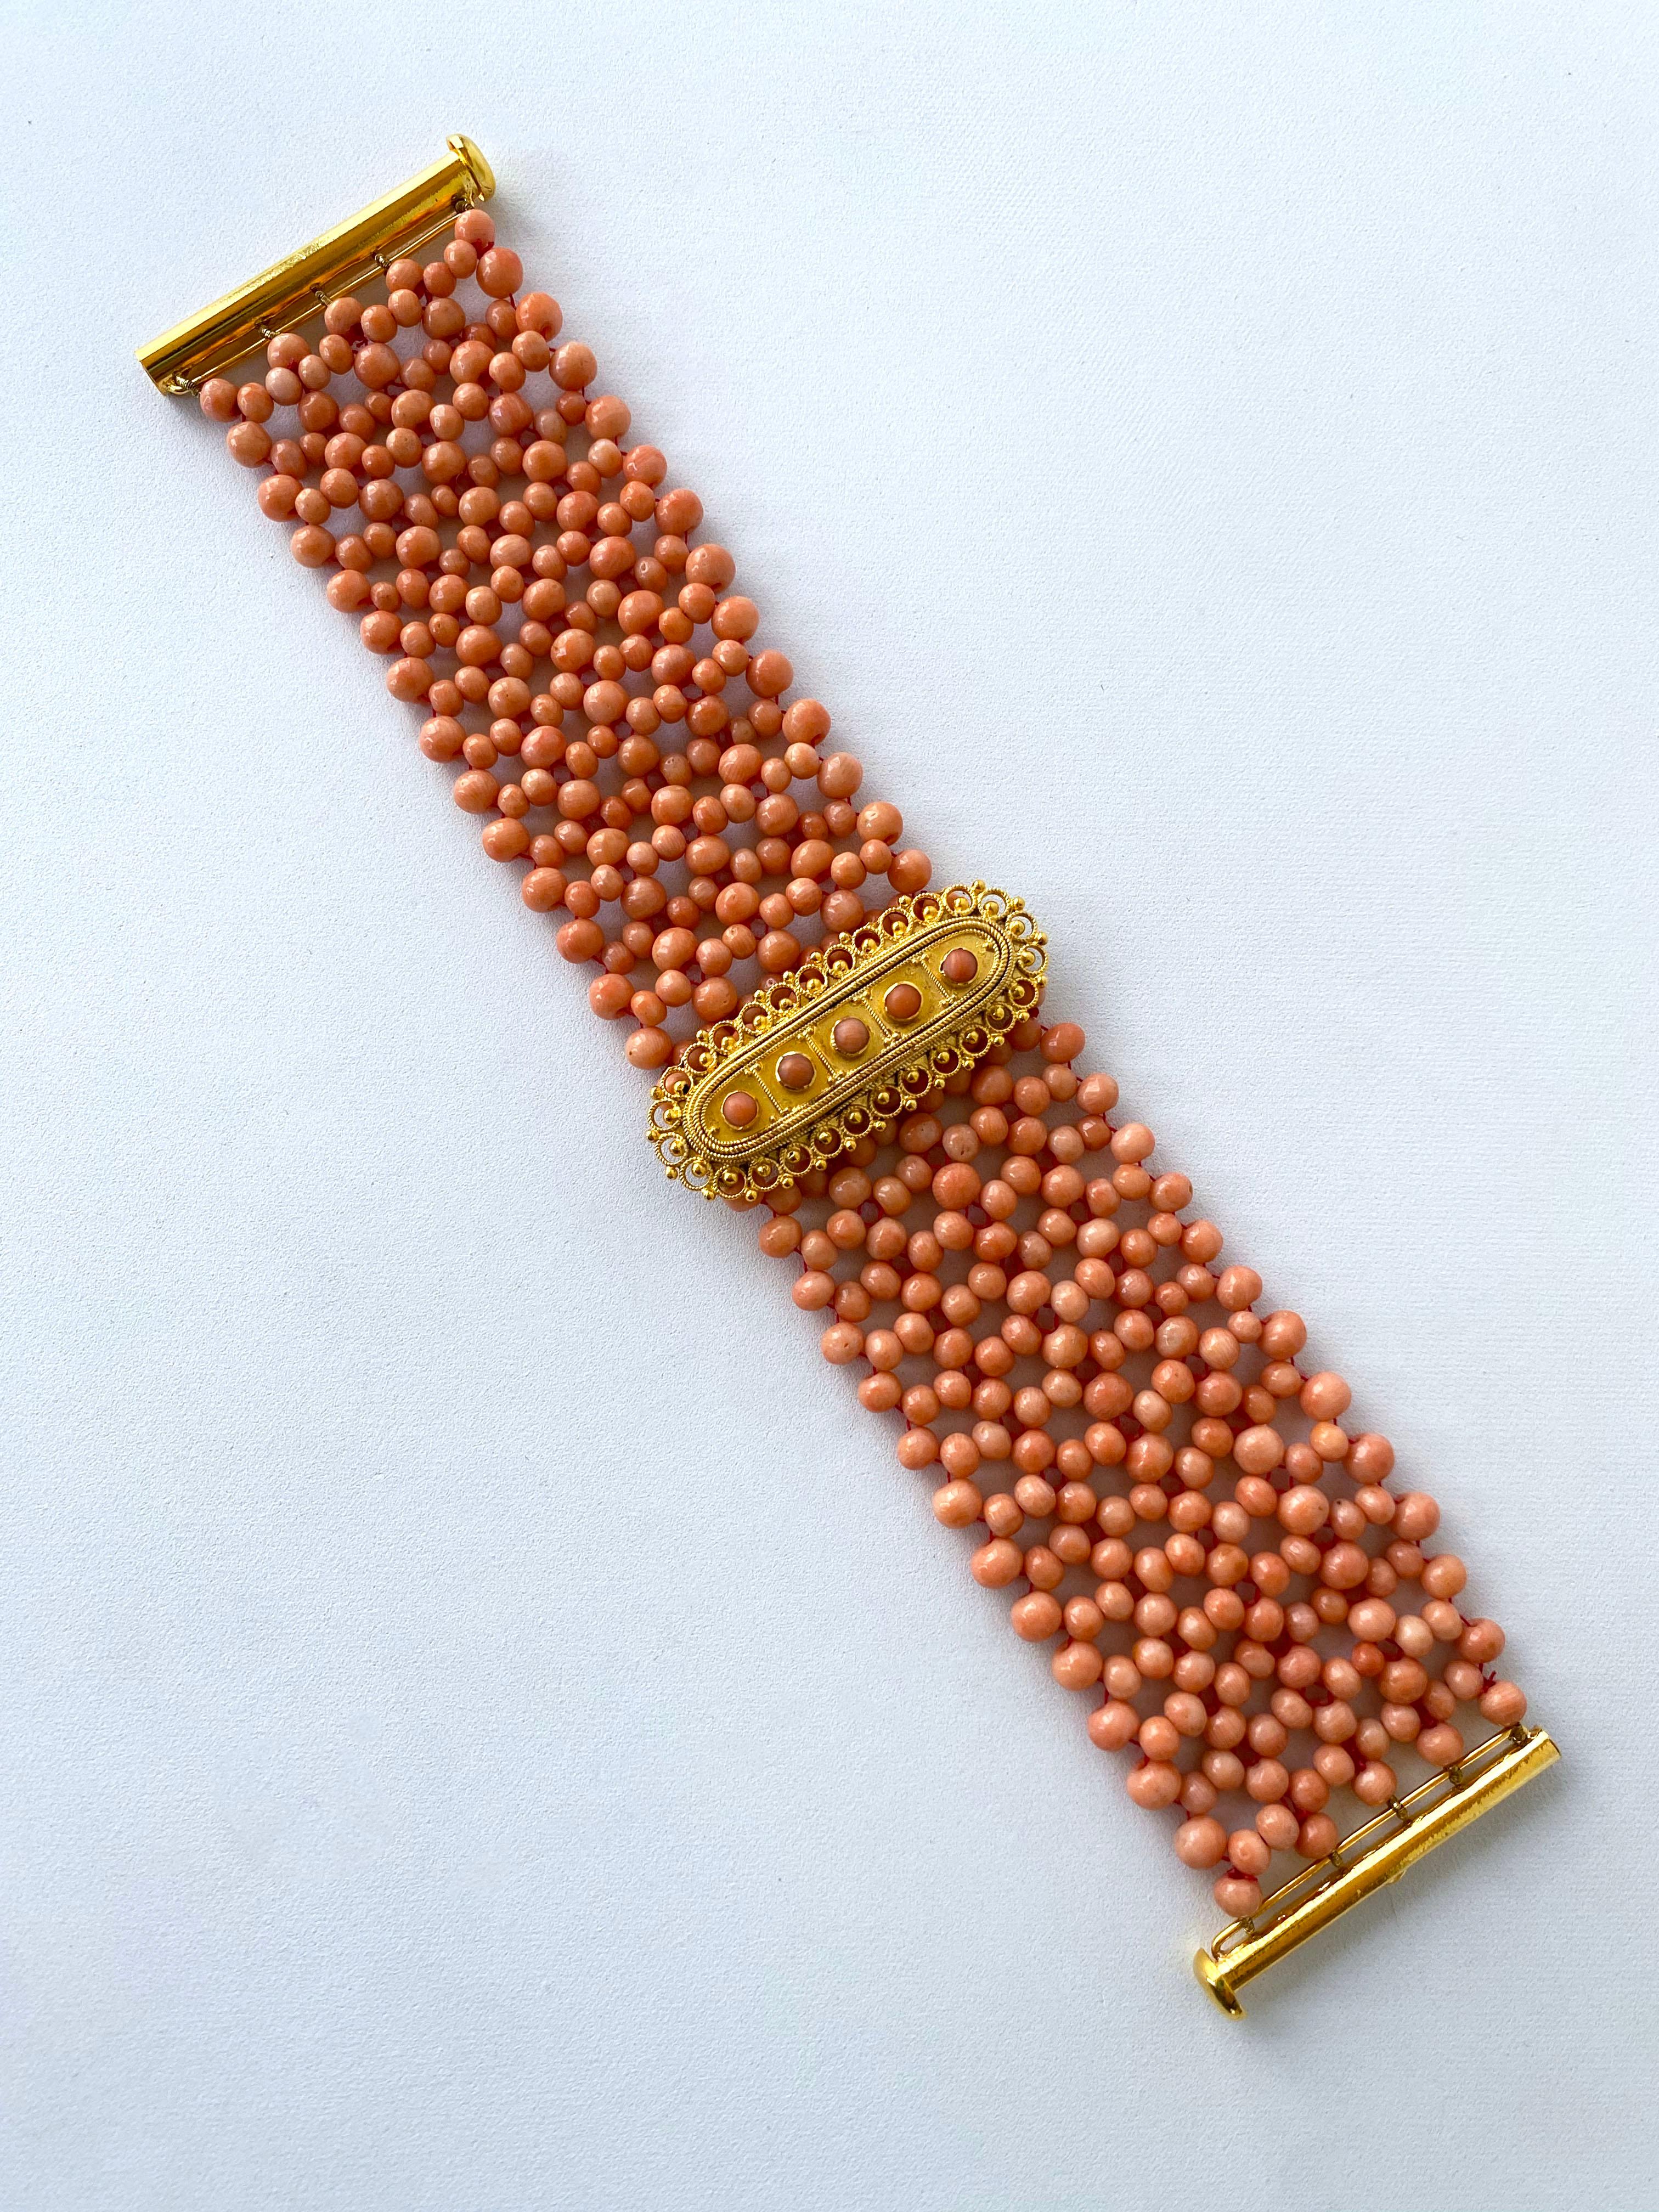 Gorgeous piece by Marina J. This bracelet is made using all natural Corals woven together into a laced like design. The Corals display a beautiful Sand Orange color and are perfectly complimented by the high shine 18k Yellow Gold Plated Centerpiece